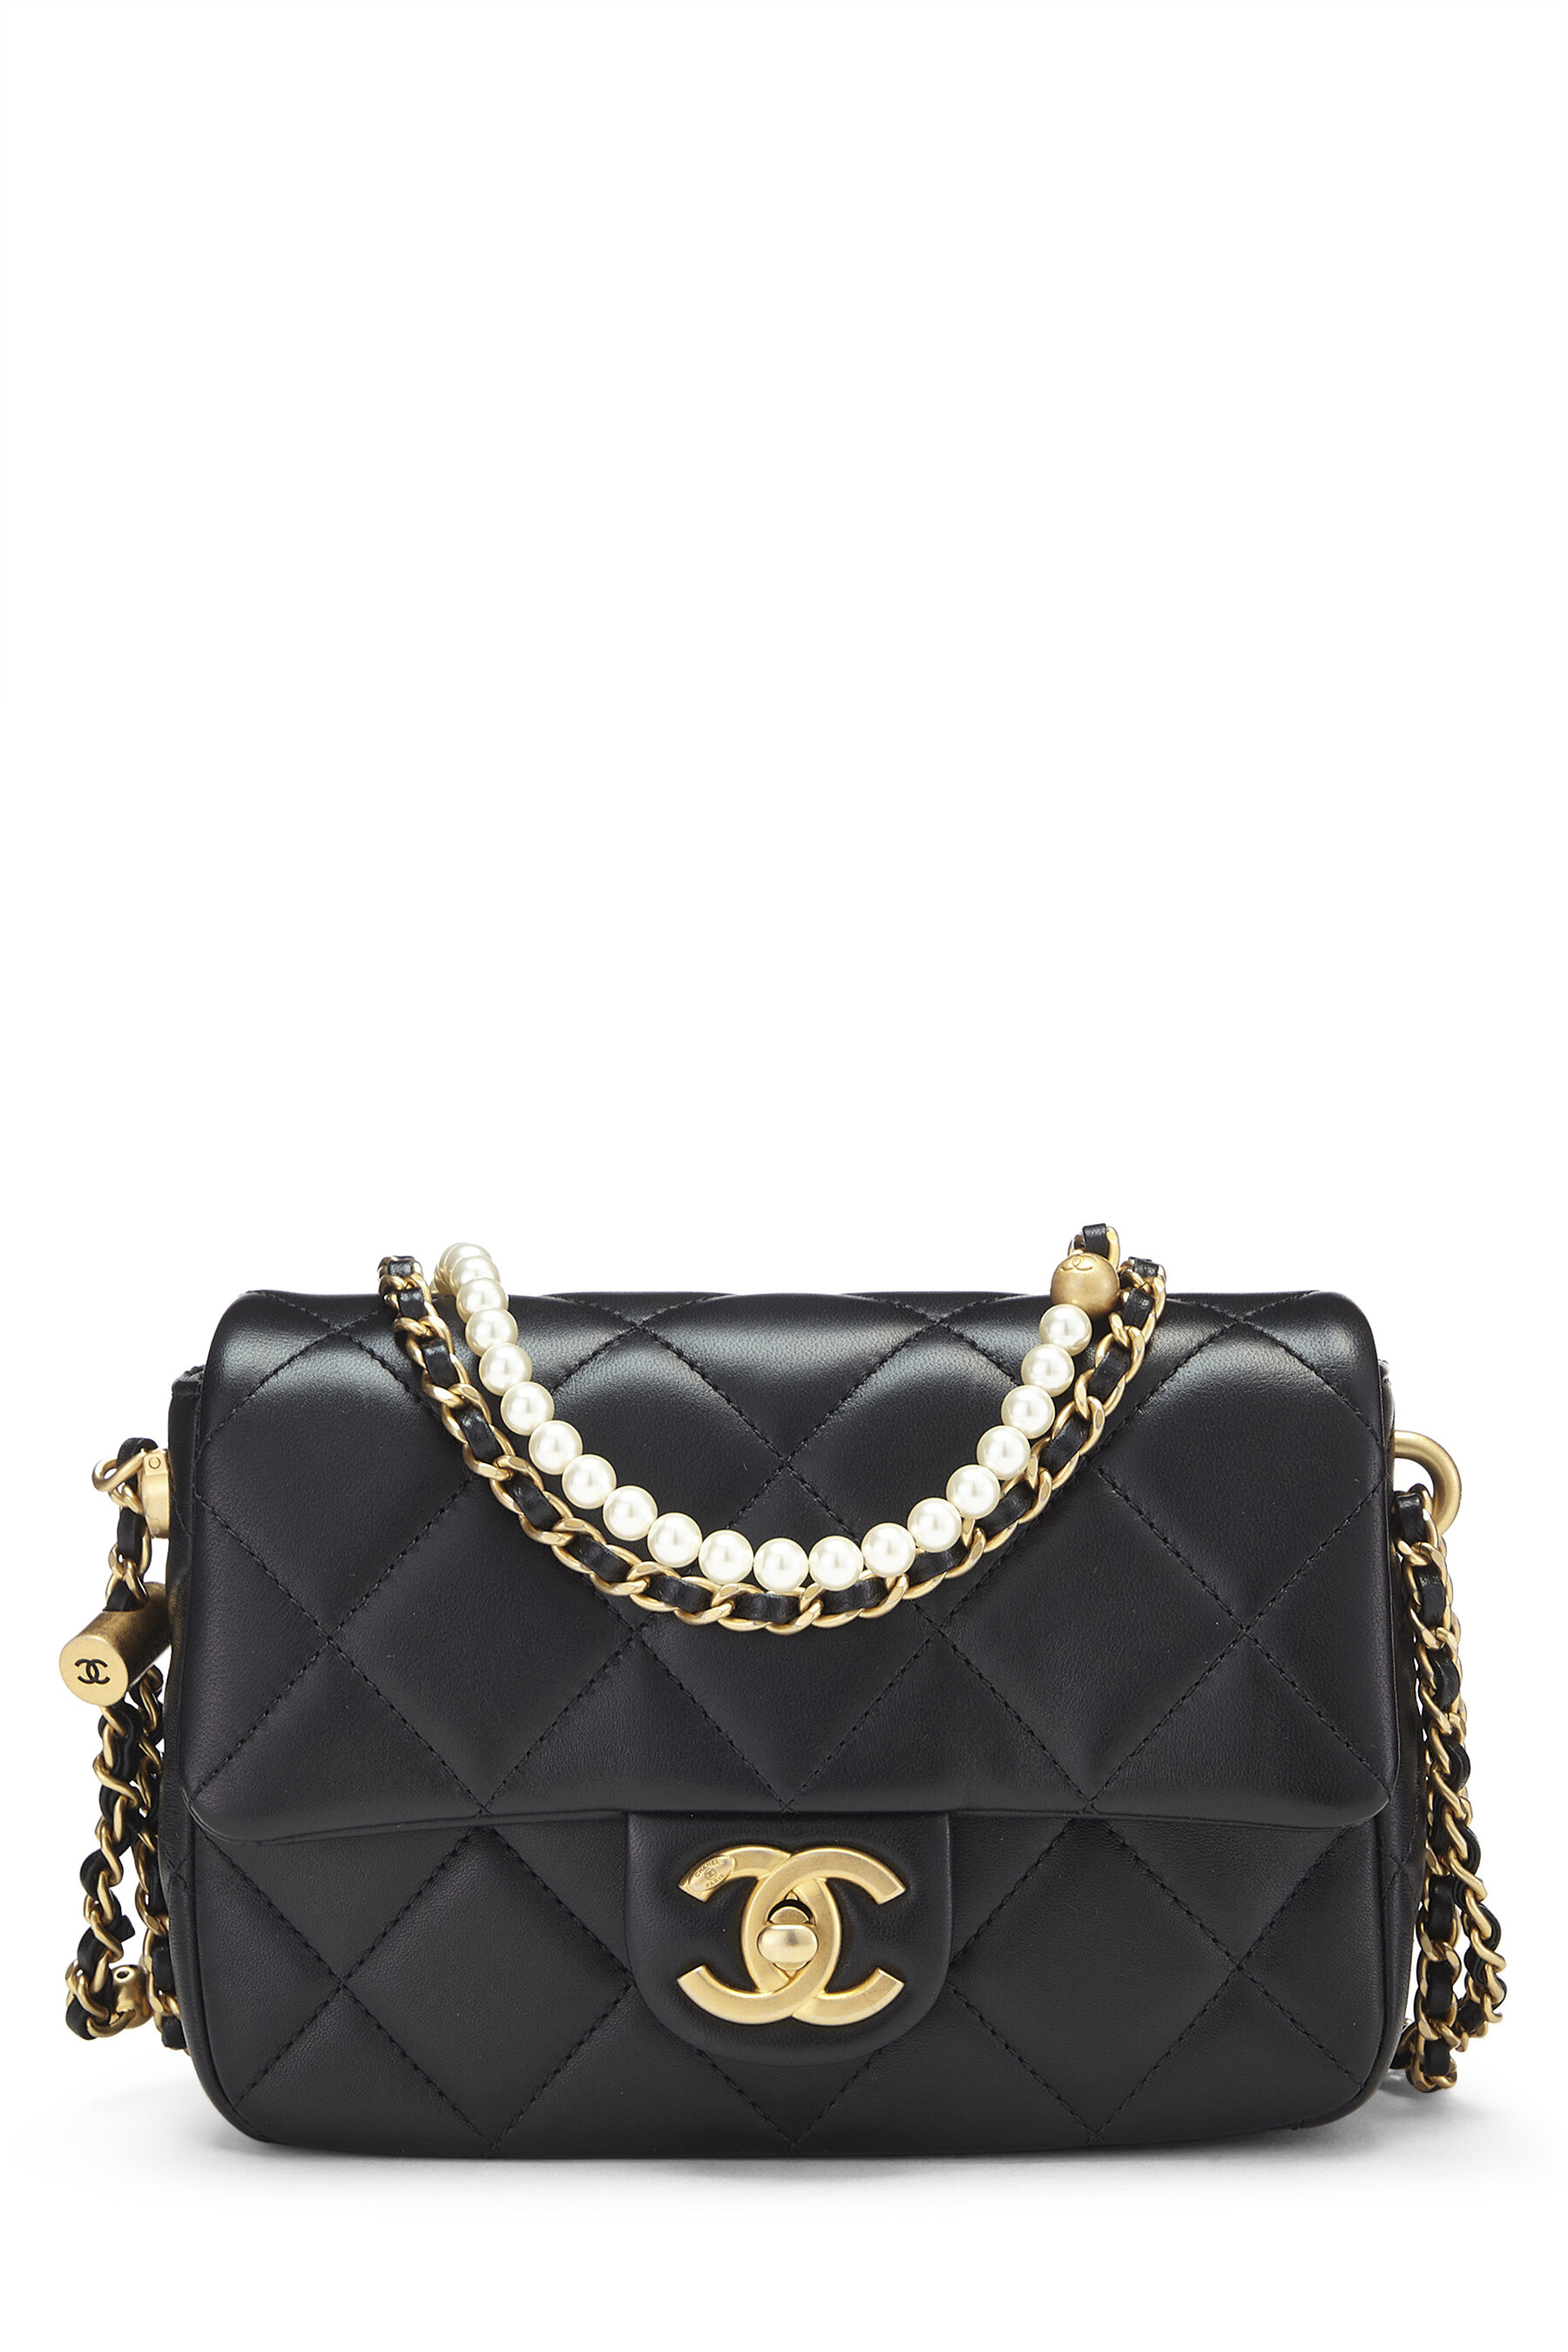 Chanel Classic Mini Rectangular, White Lambskin Leather with Gold Hardware,  Preowned in Box WA001